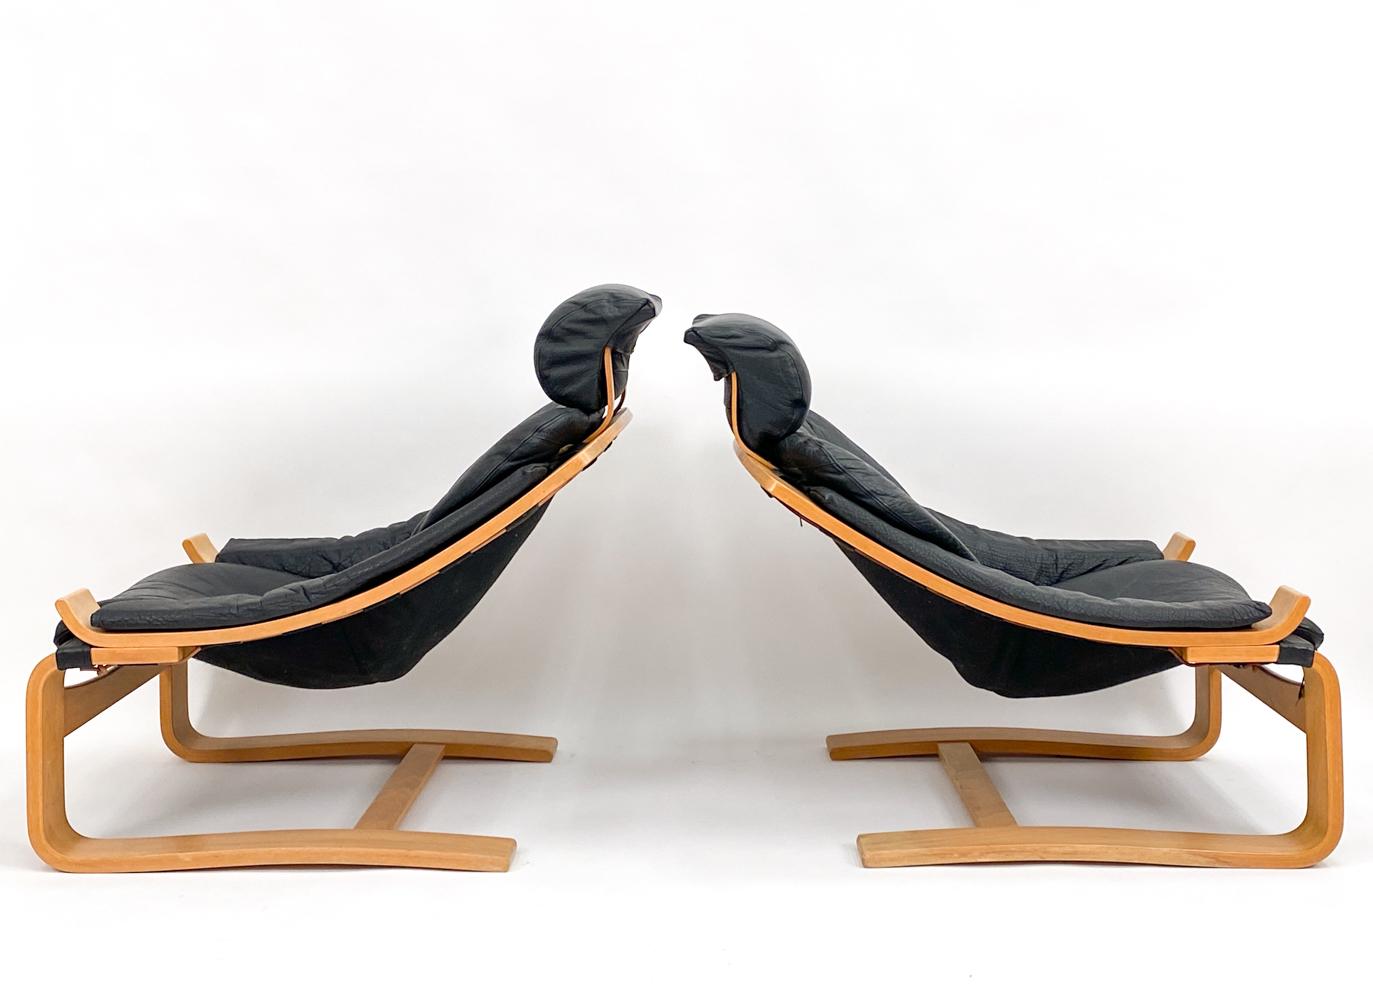 '4' Kroken Buffalo Leather Lounge Chairs by Åke Fribytter for Nelo Sweden, 1970s For Sale 3